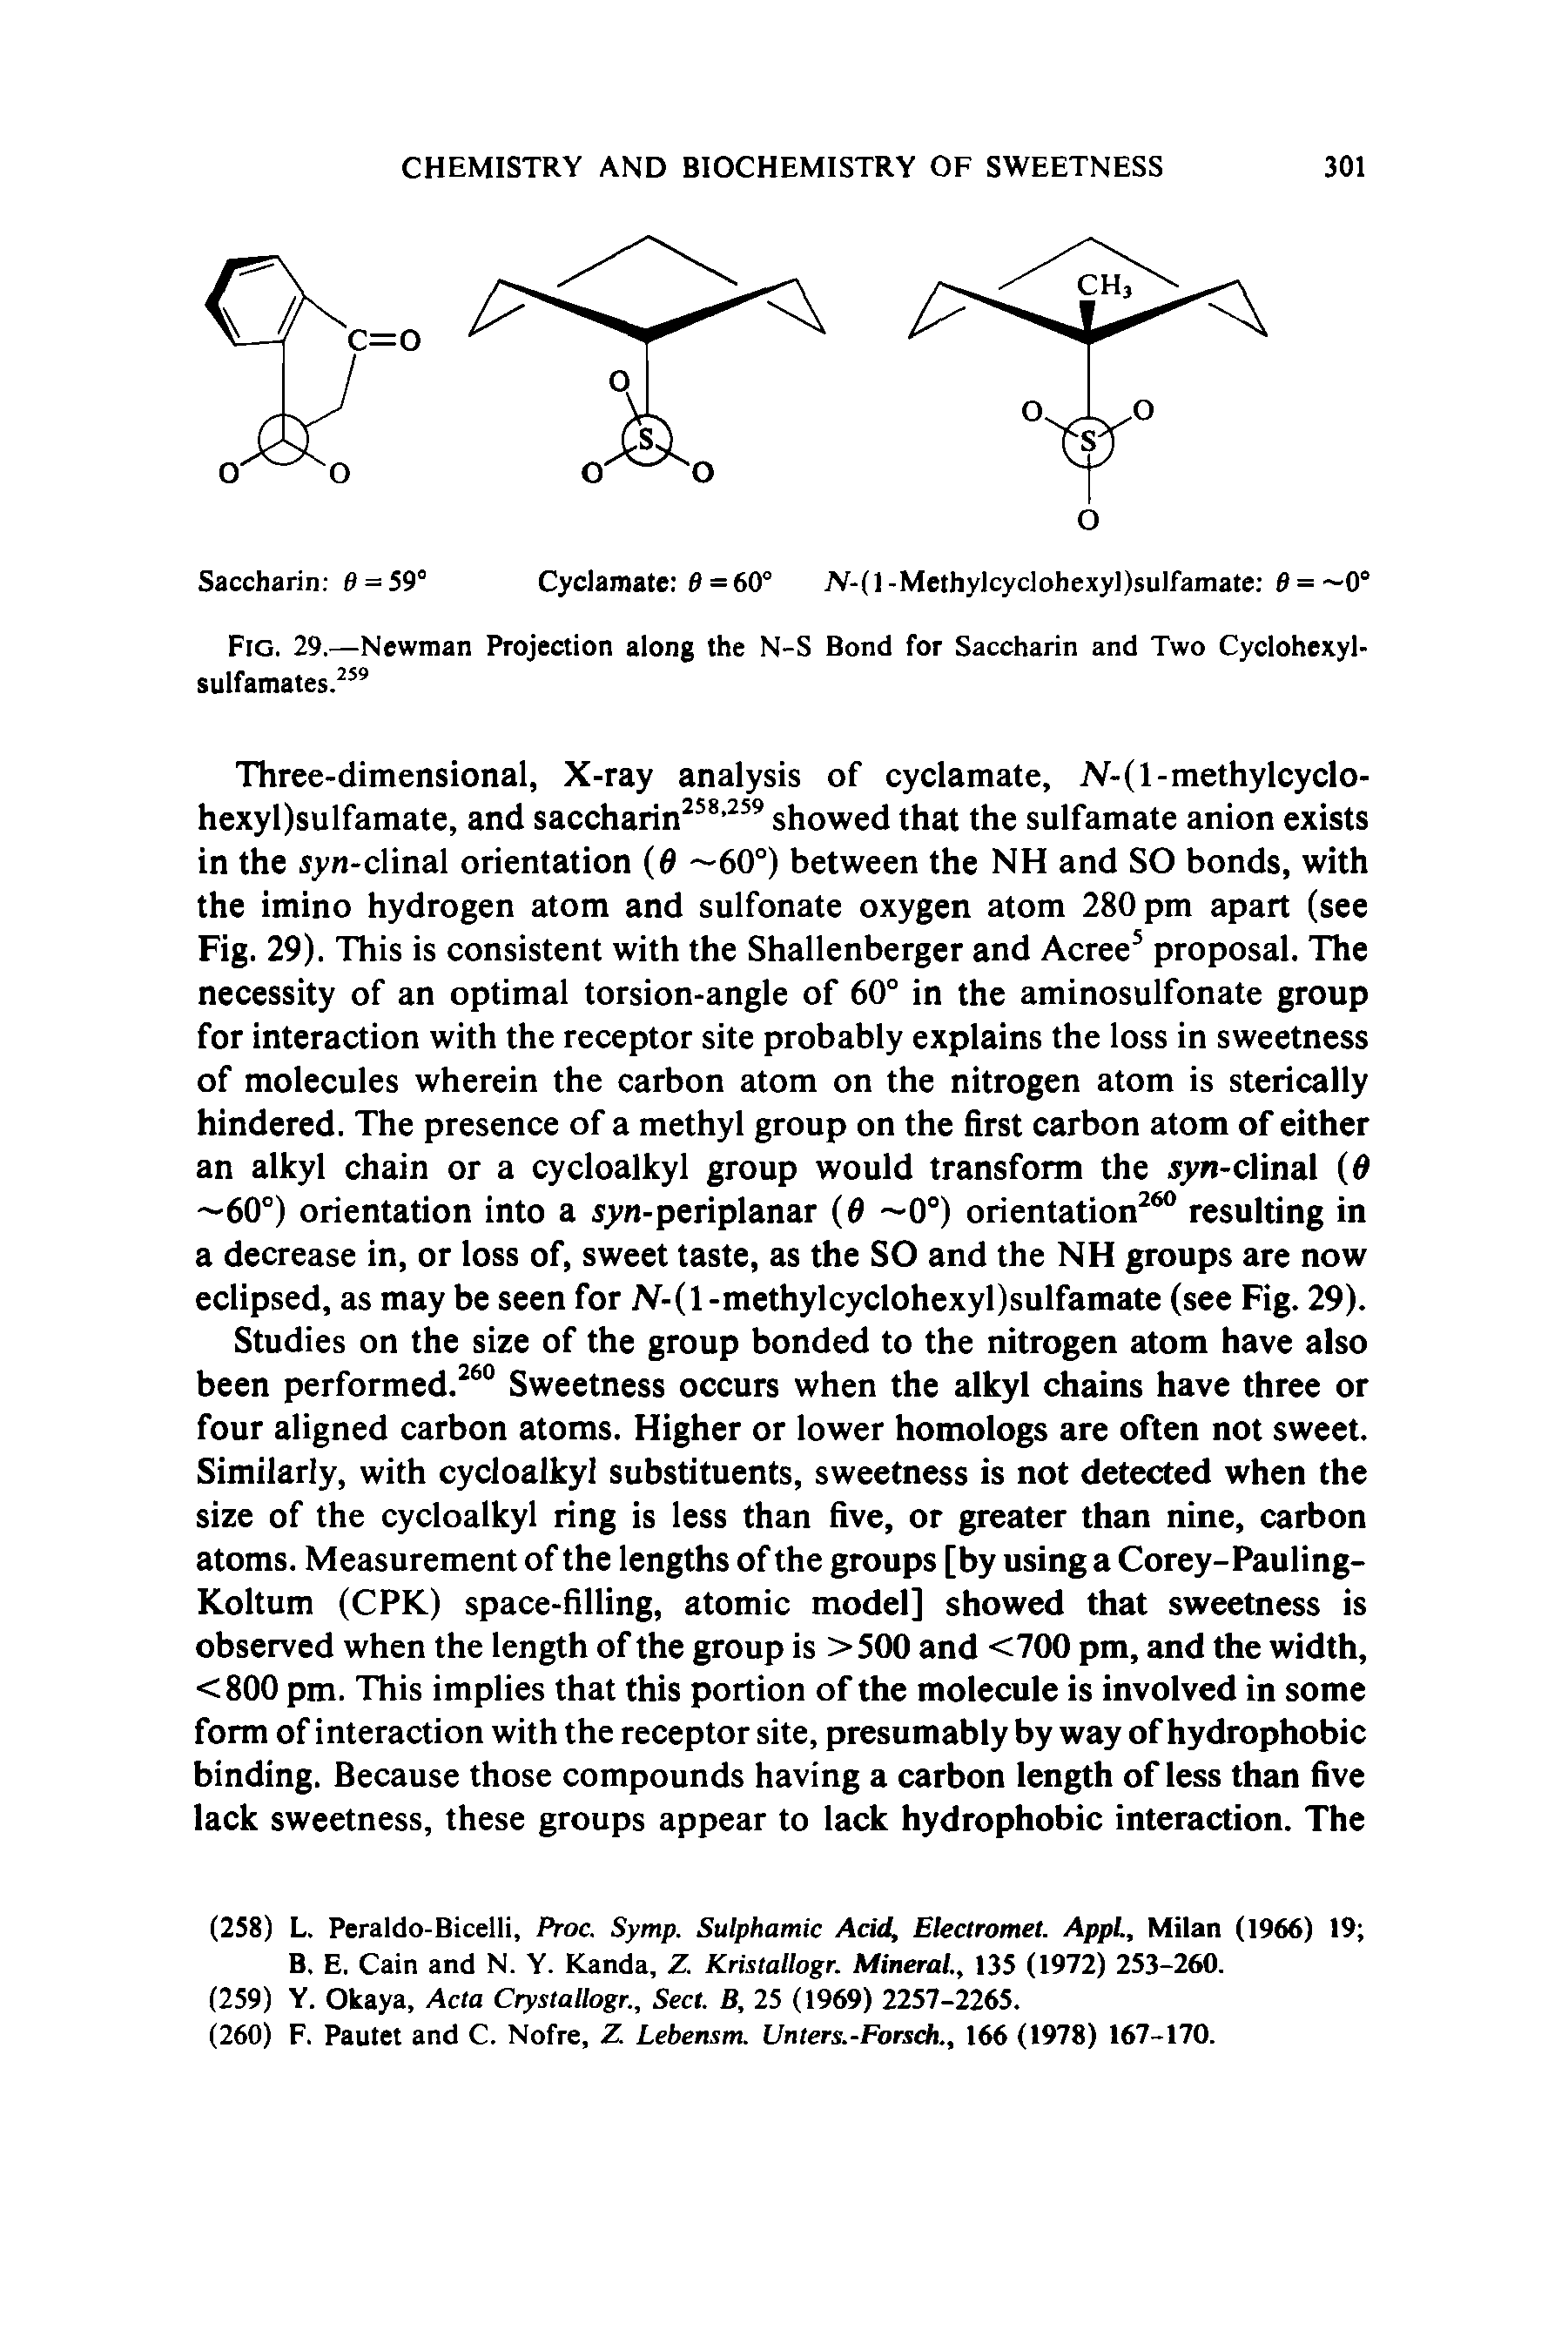 Fig. 29.—Newman Projection along the N-S Bond for Saccharin and Two Cyclohexyl-sulfamates. ...